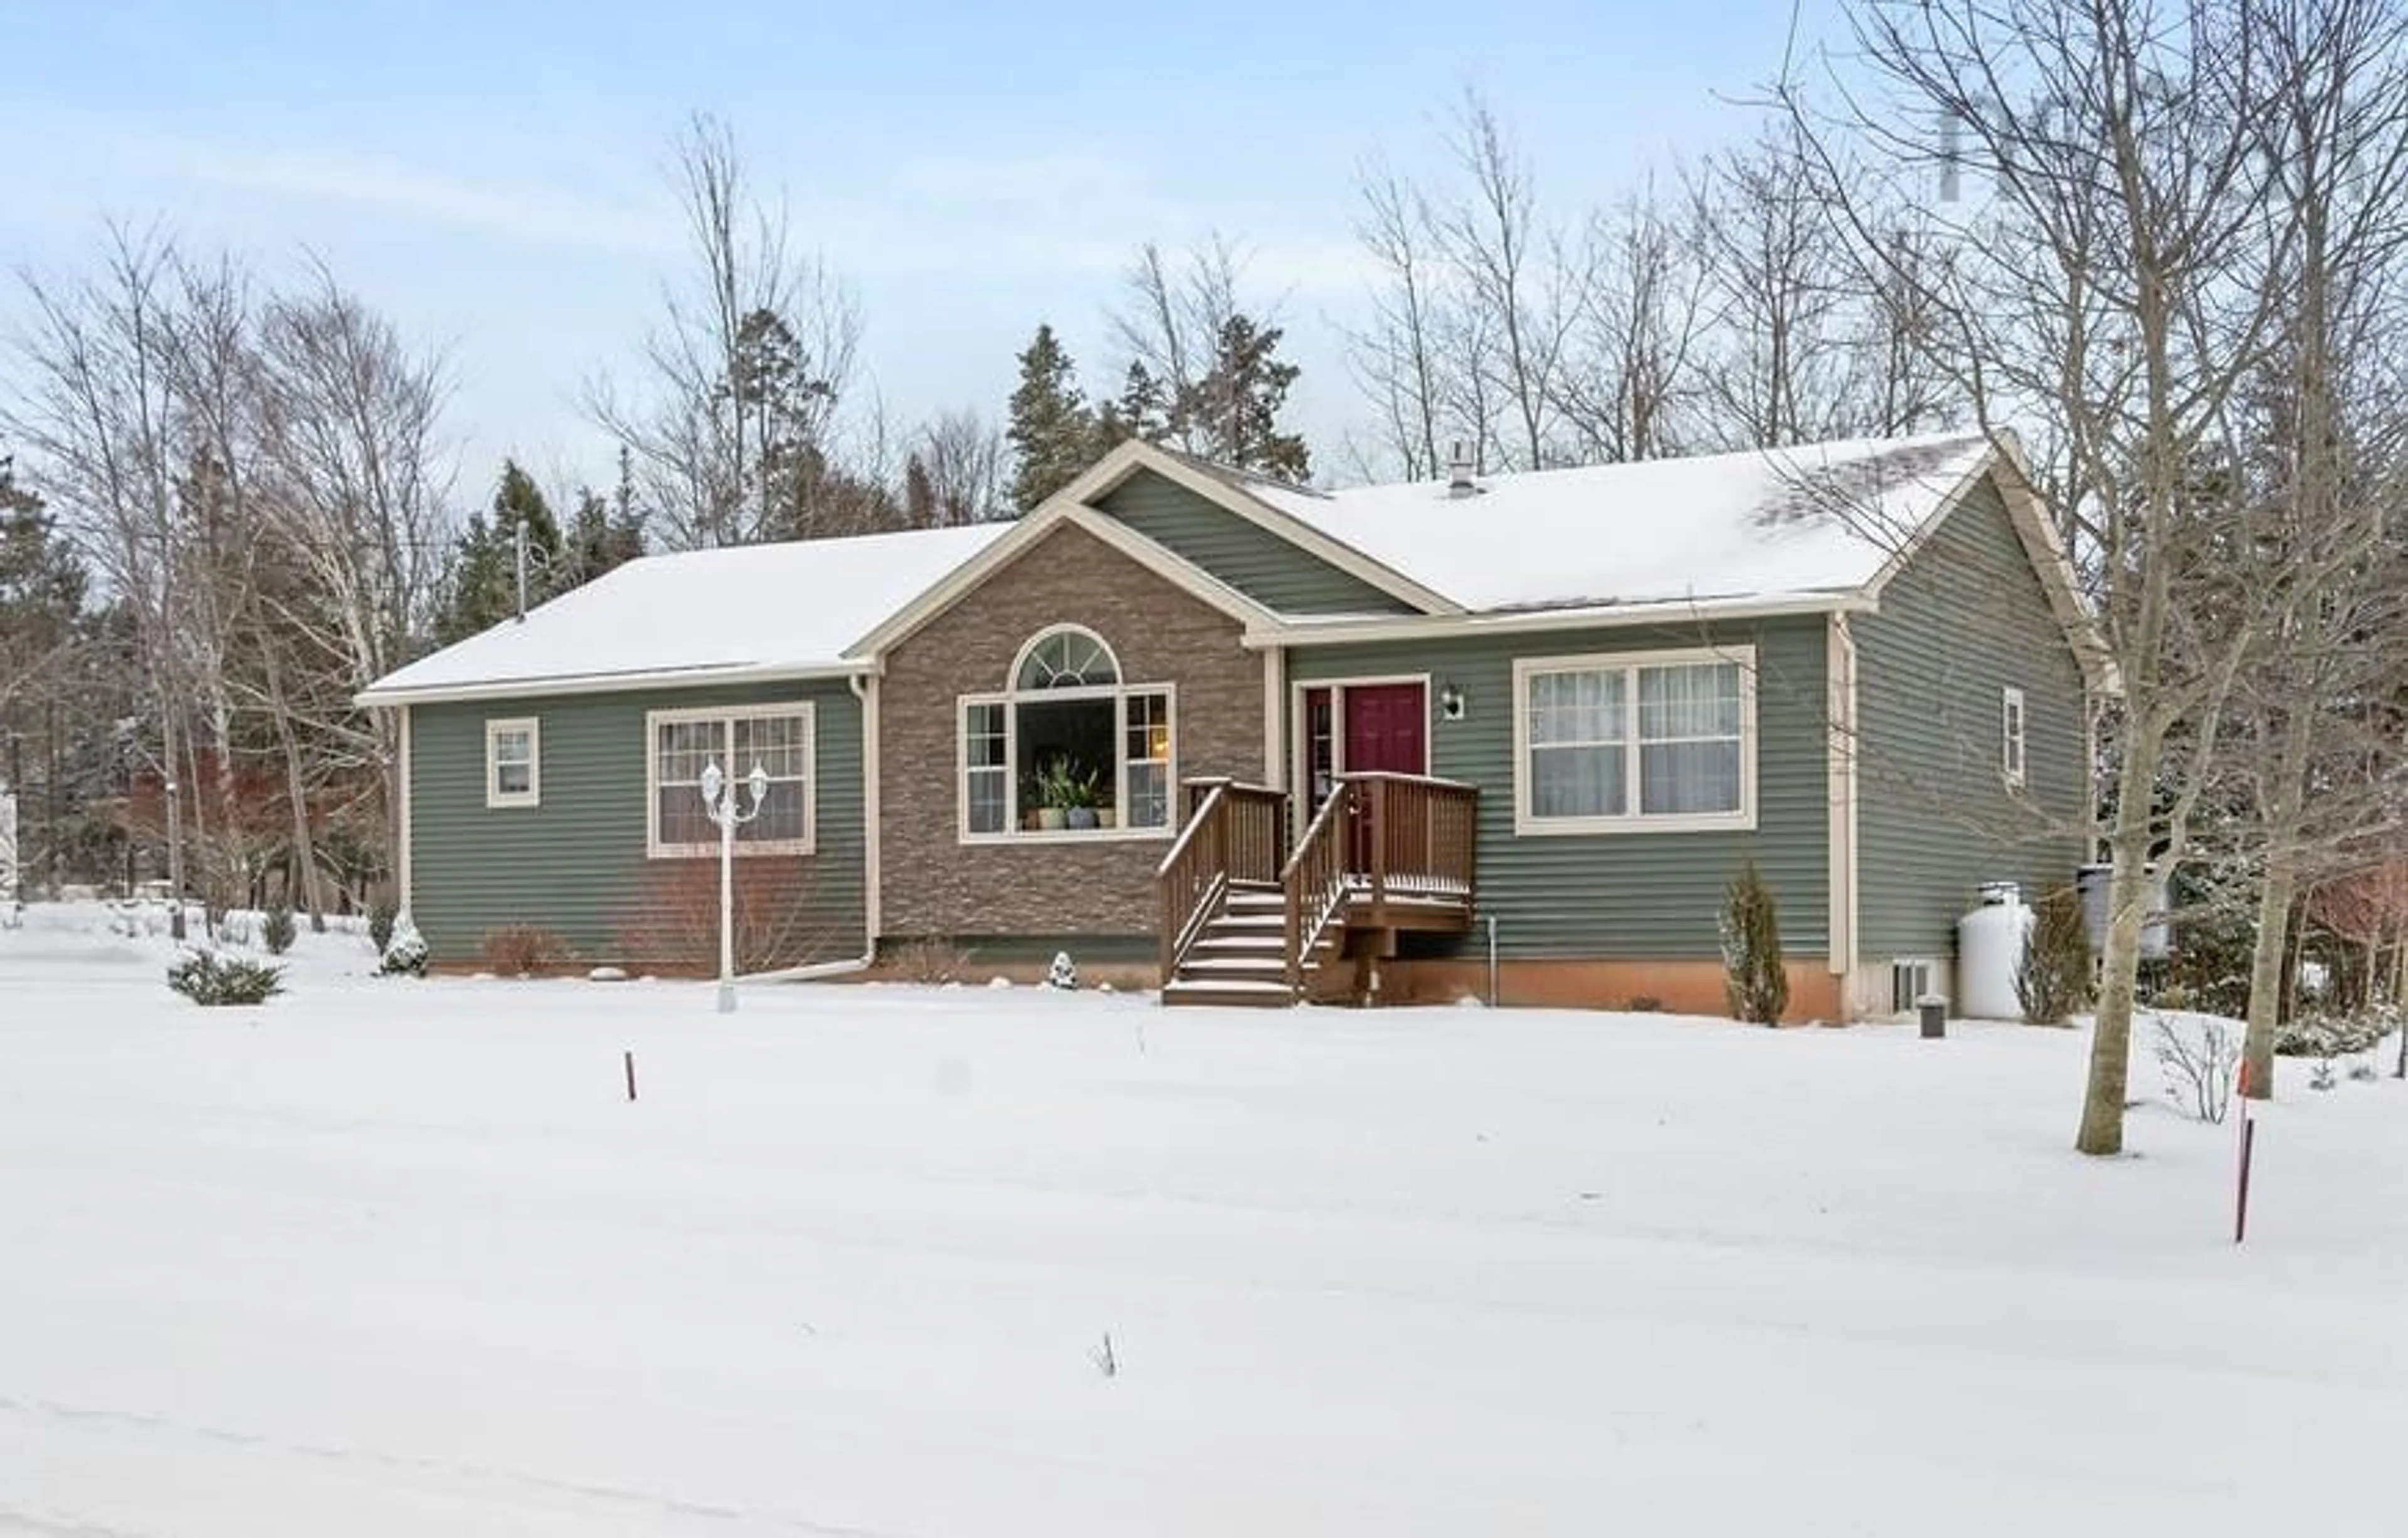 Home with unknown exterior material for 32 Mosswood Lane, Valley Nova Scotia B6L 2K5